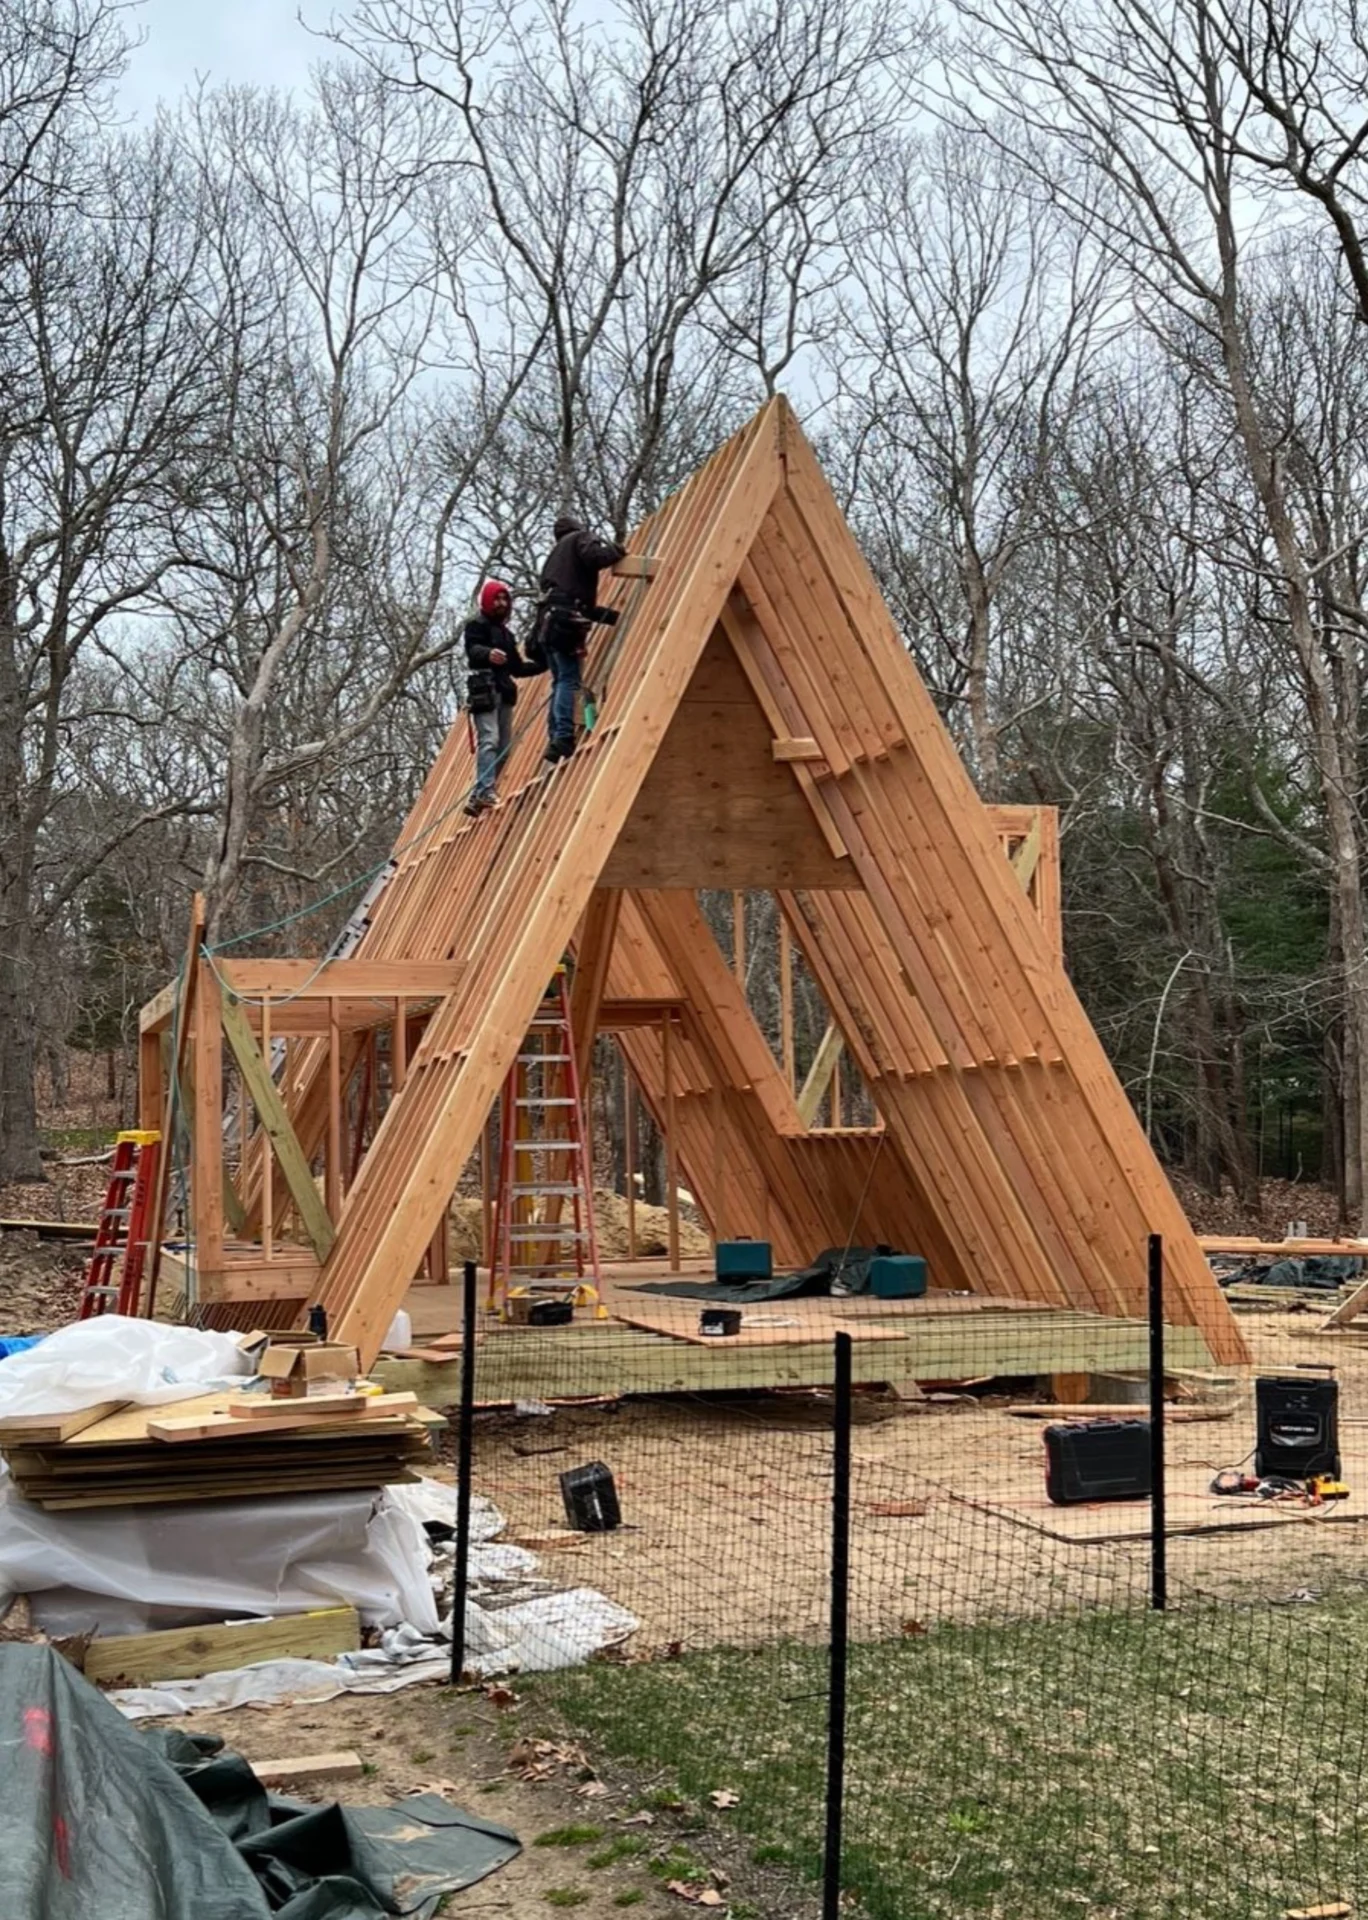 Two men working on a wooden structure in the woods.